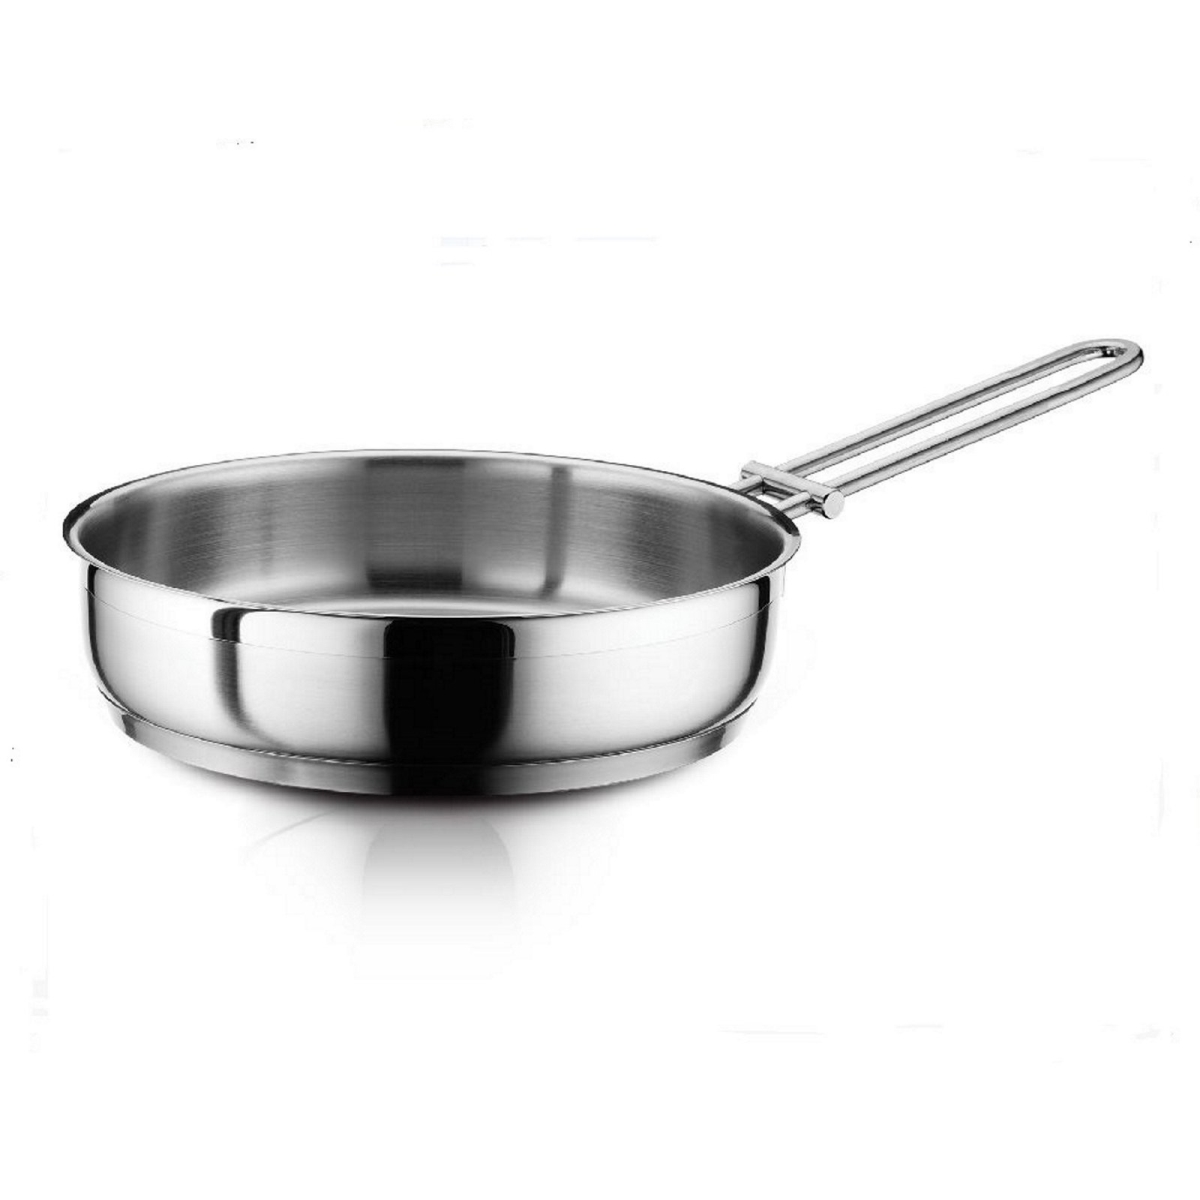 Hf8 8 In. Classic 18 By 10 Stainless Steel Deep Frying Stir Fry Pan